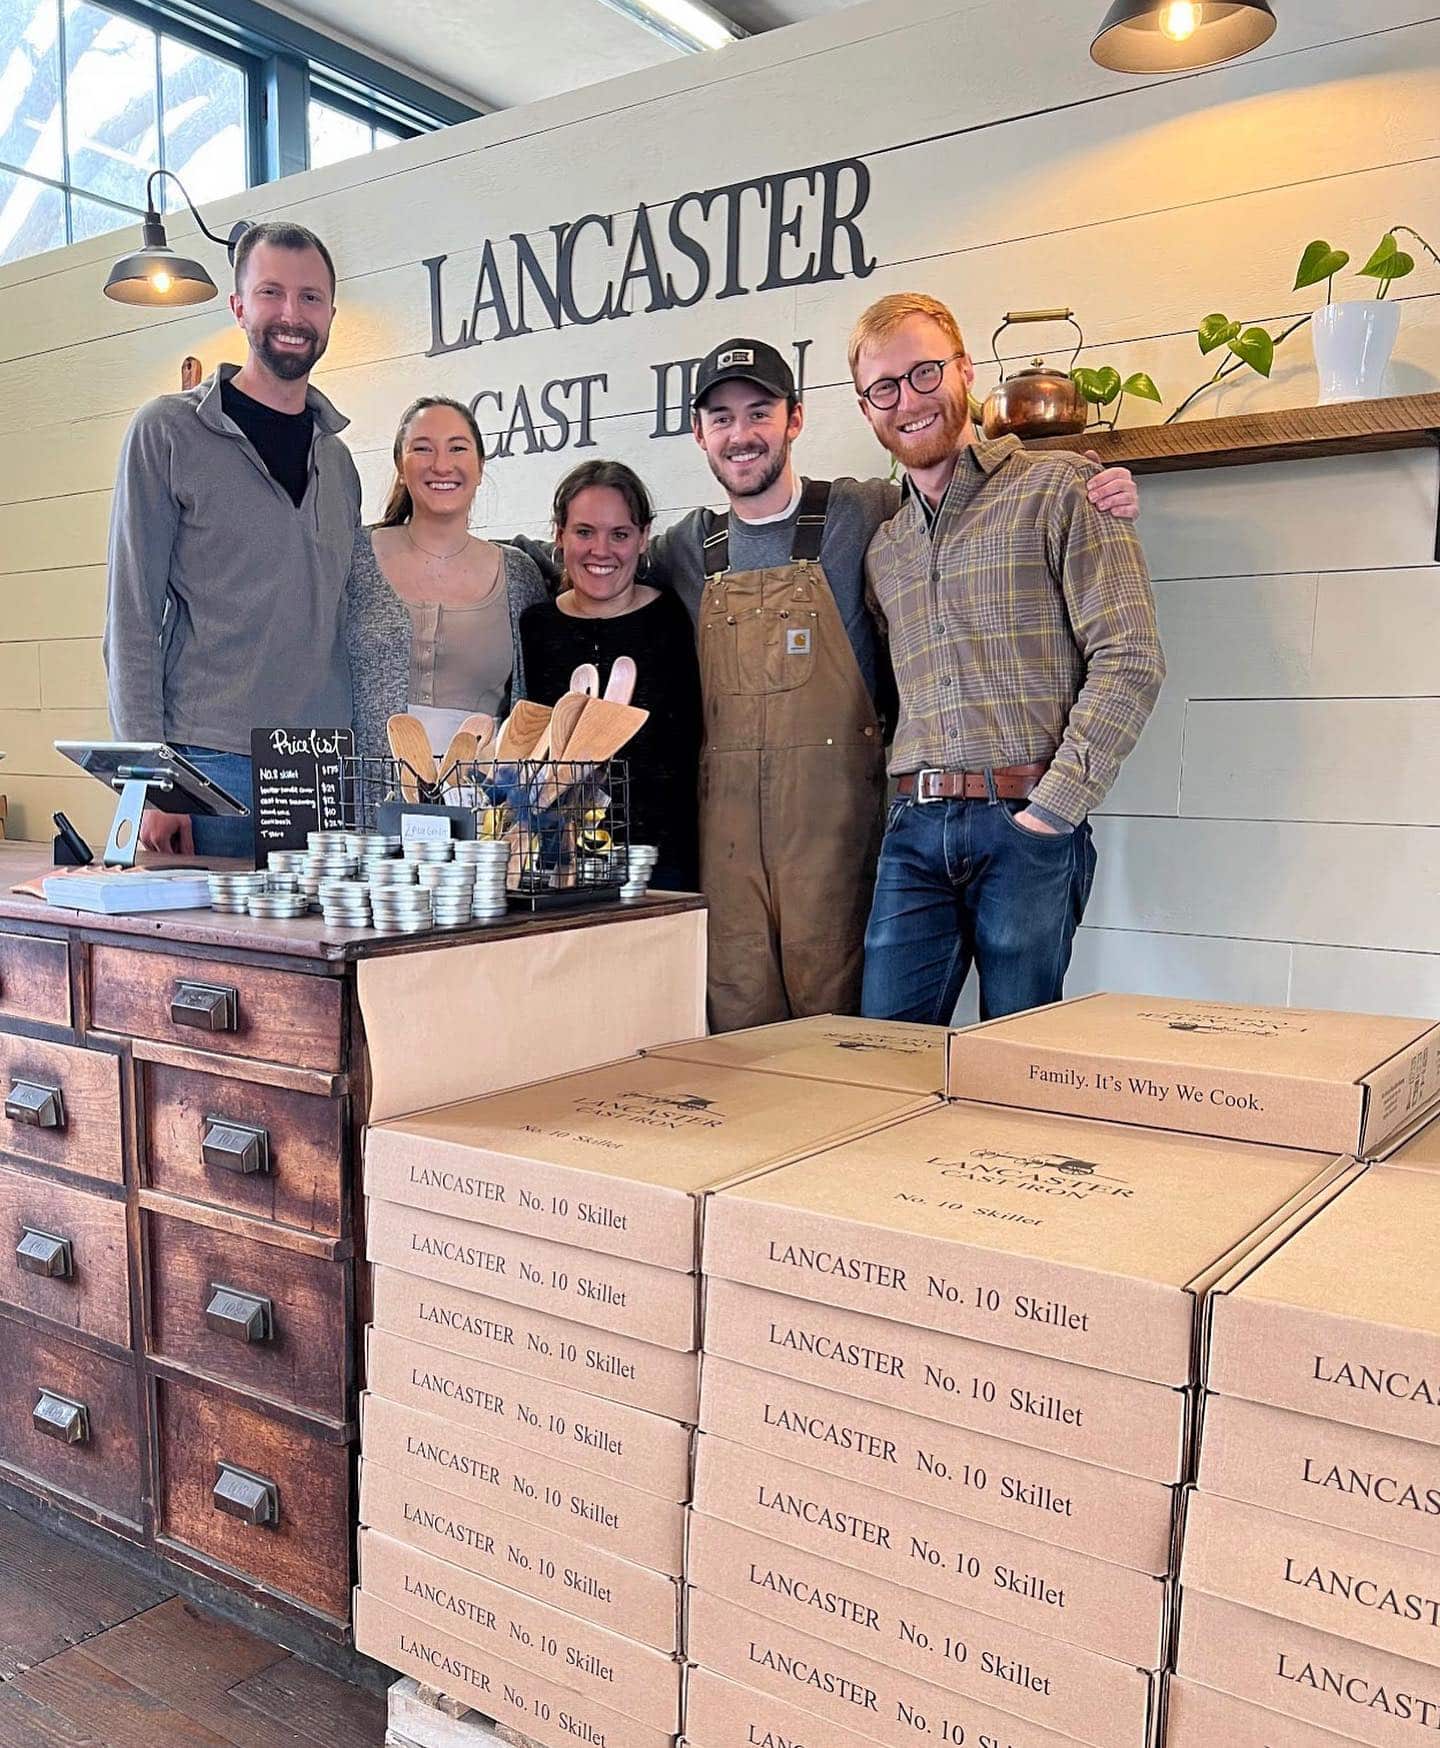 Lancaster Cast Iron opens retail shop in former schoolhouse in Conestoga, What's in store